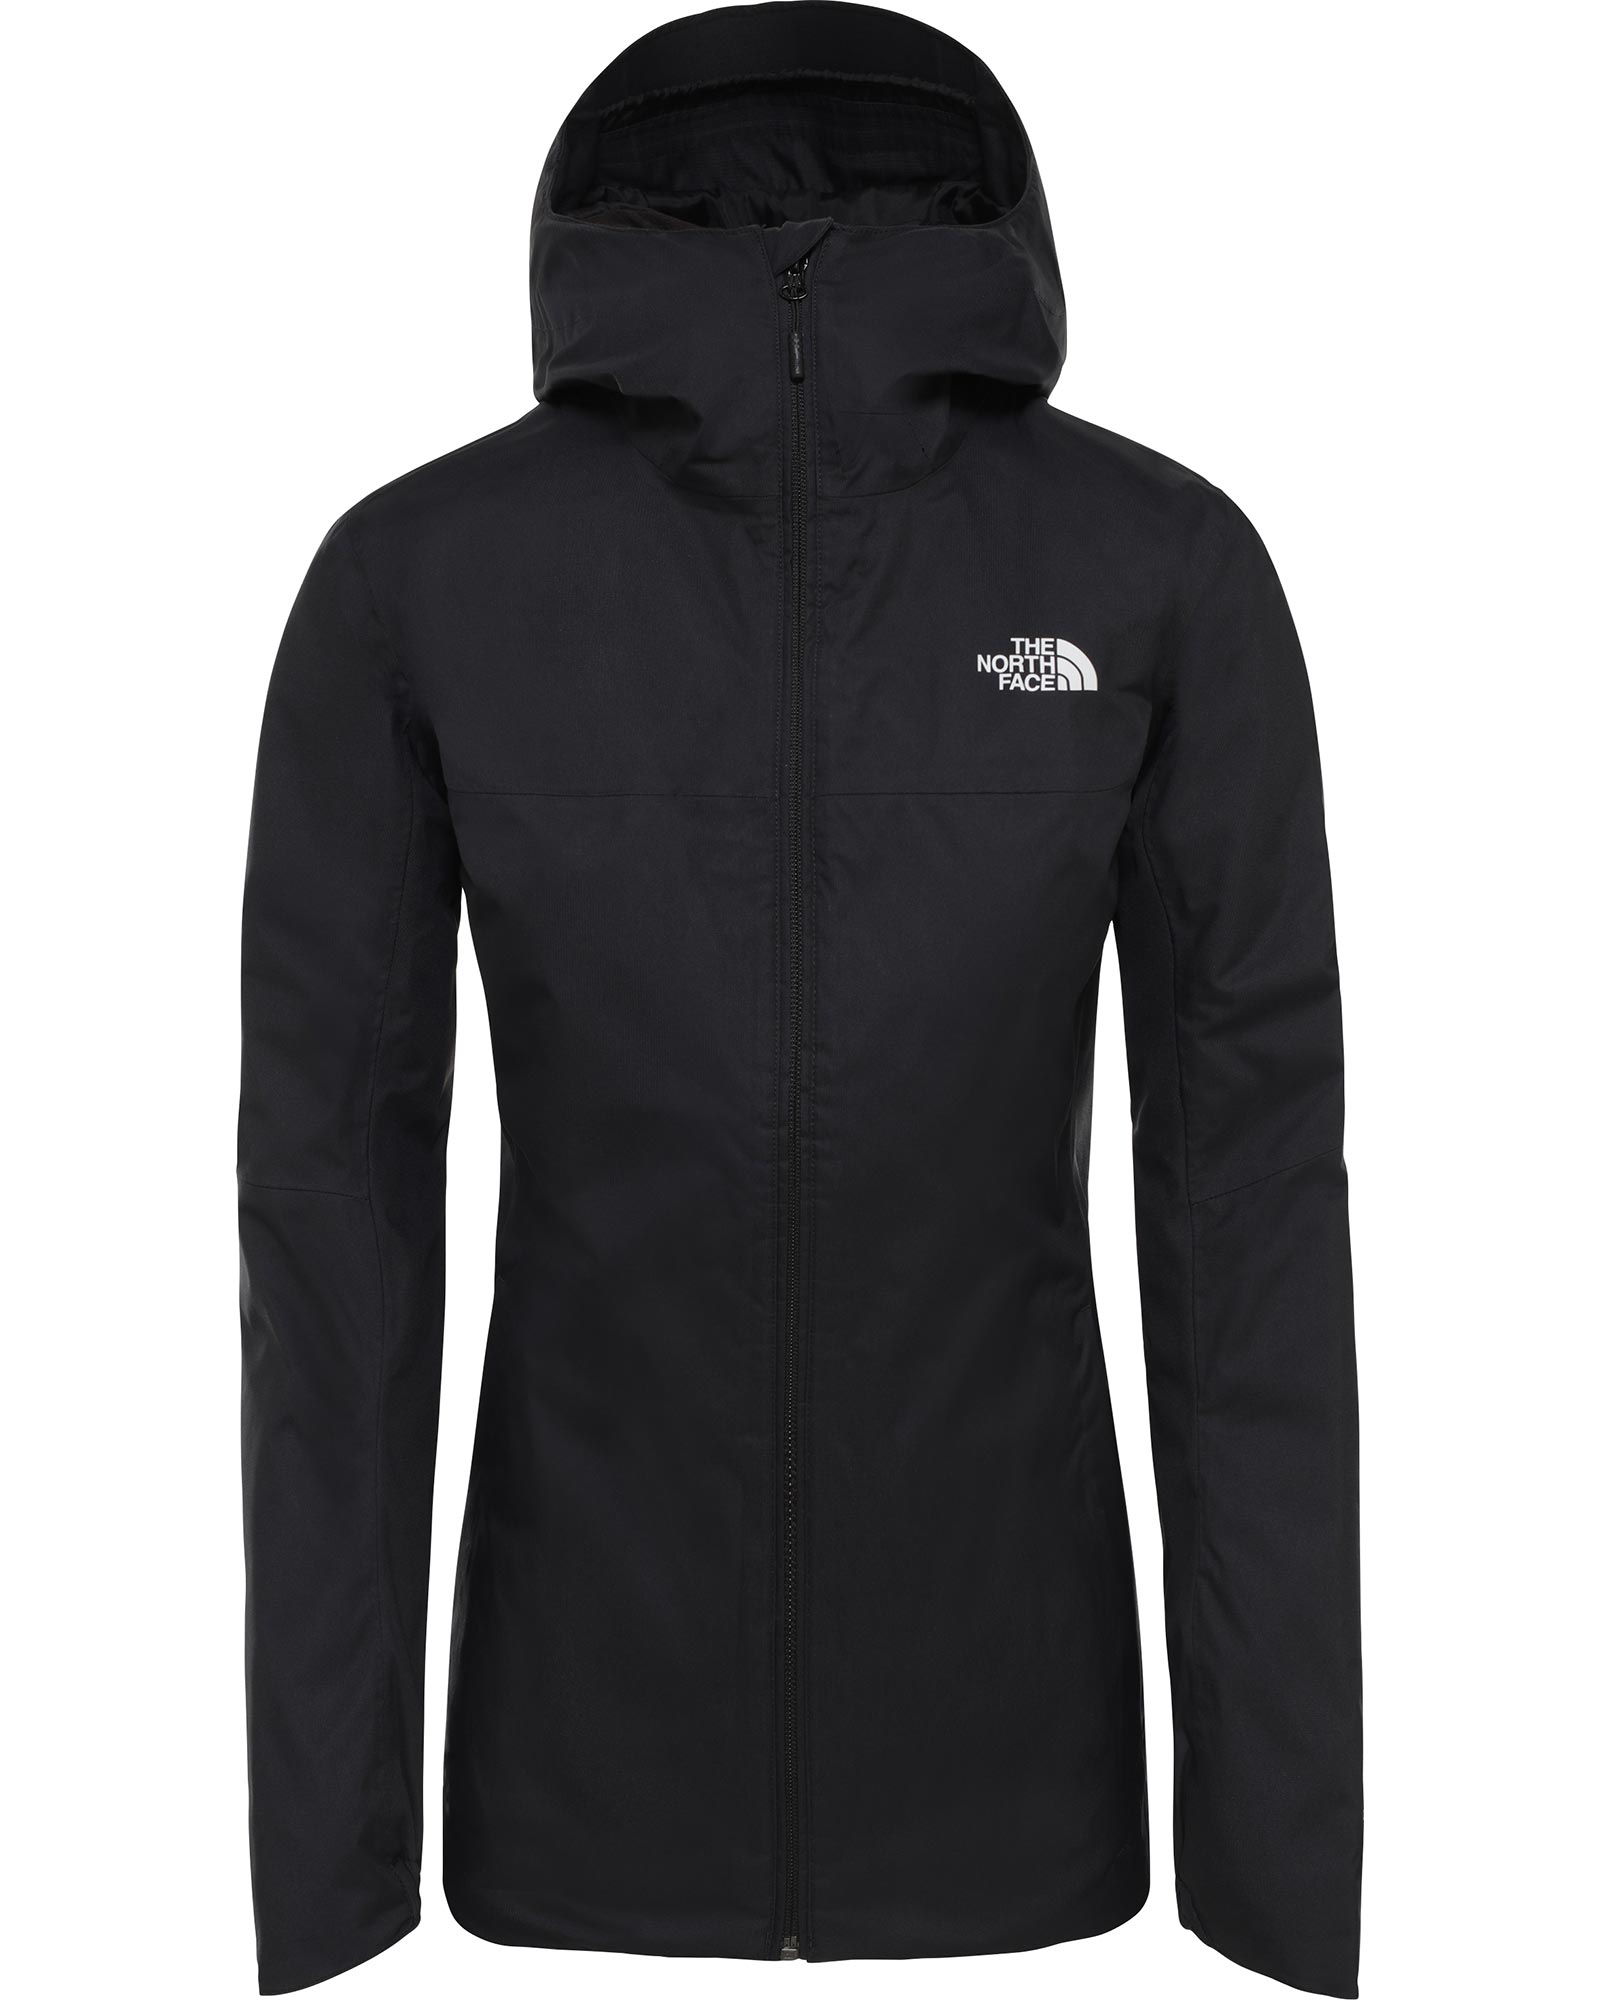 The North Face Quest DryVent Women’s Insulated Jacket - TNF Black S